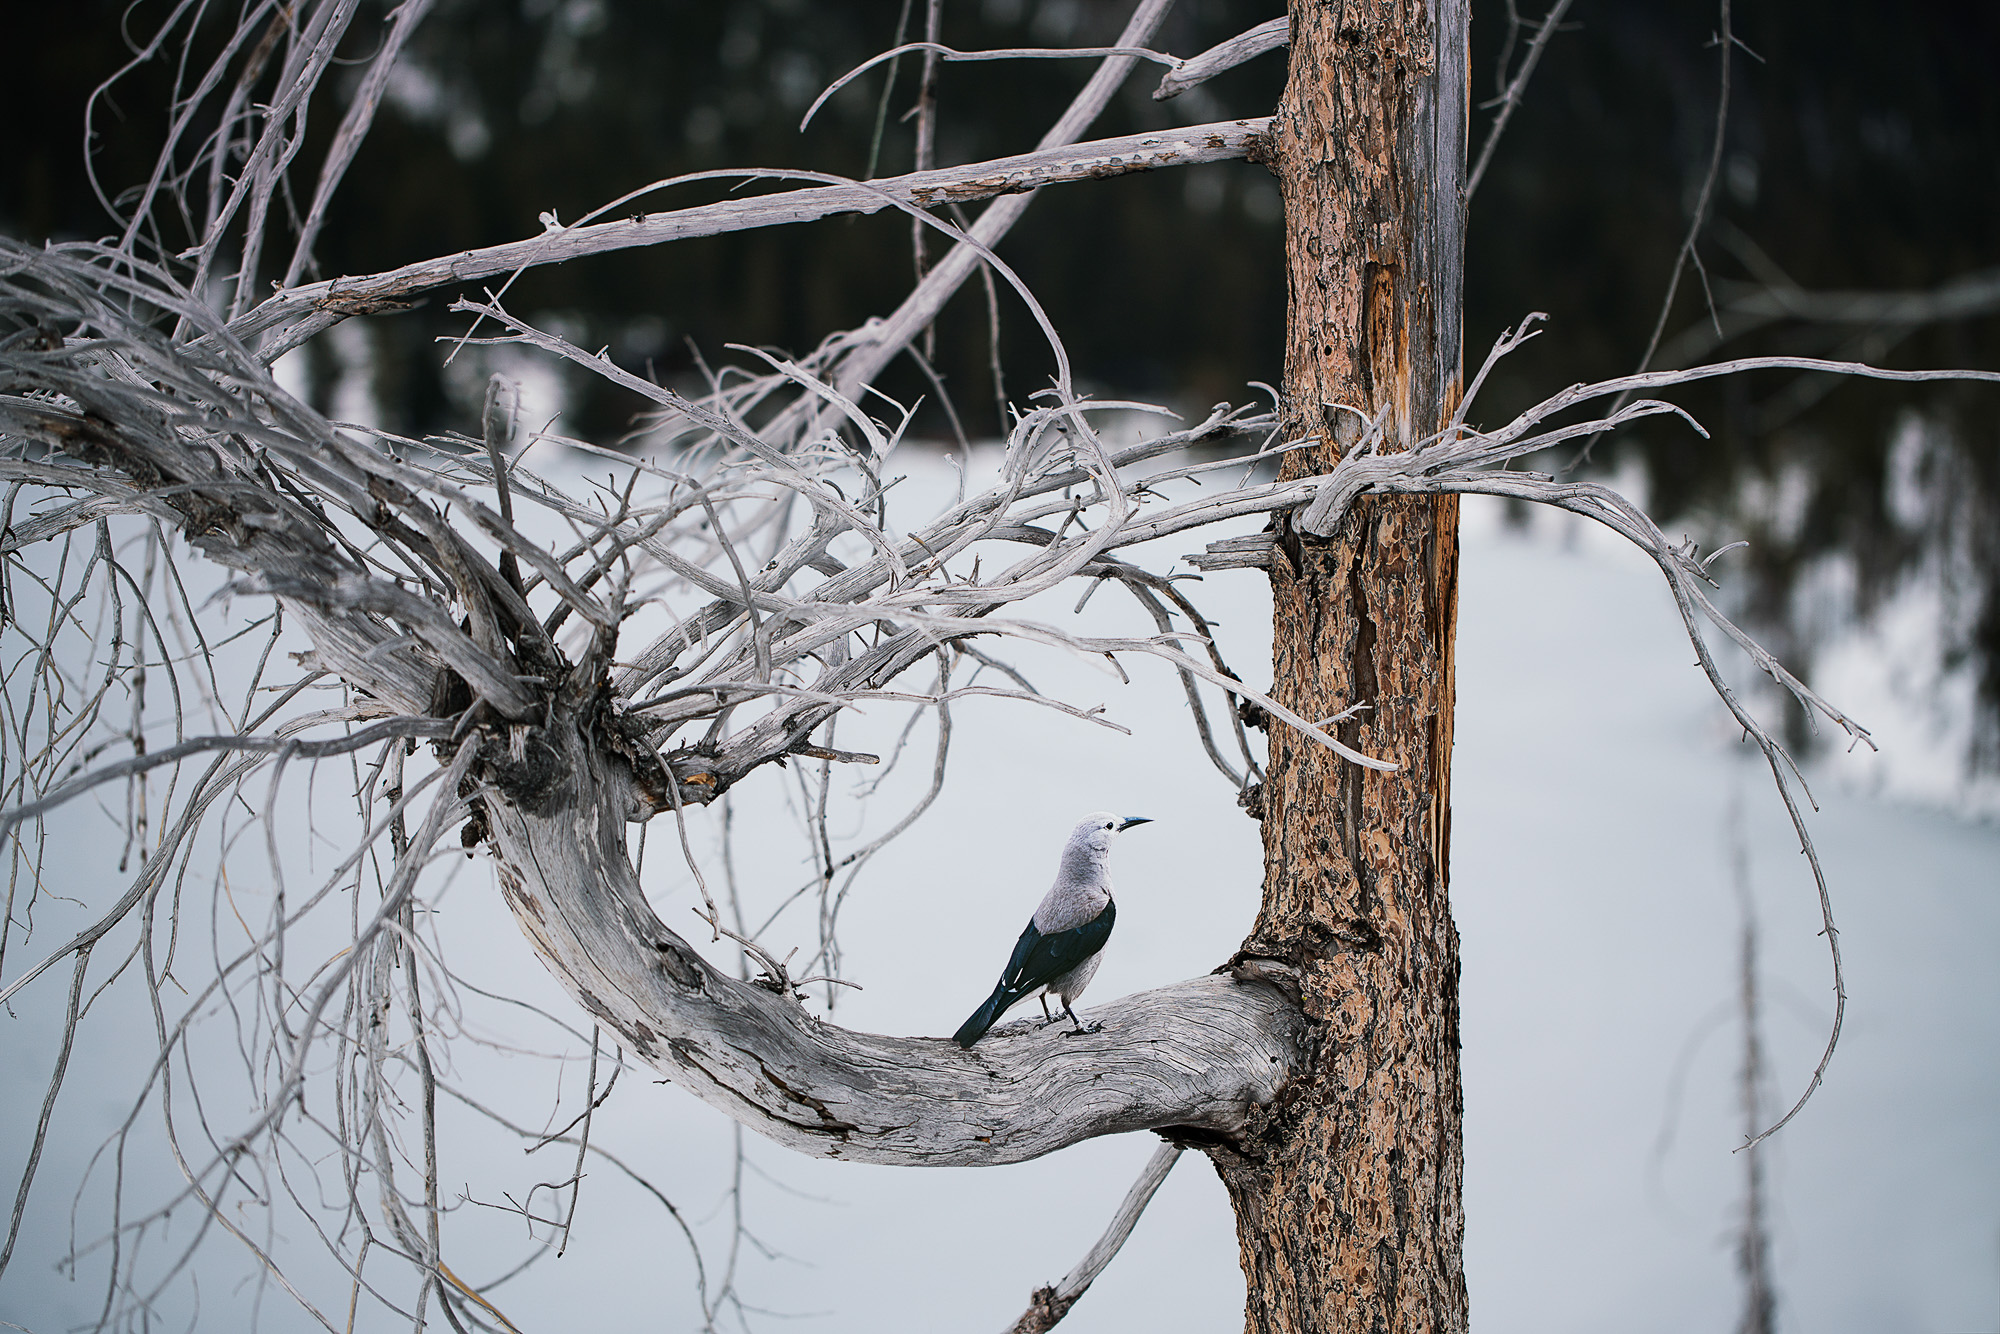 A paper cutout of a photograph of a Clark’s Nutcracker bird placed on the branch of a bare tree in a snowy landscape.